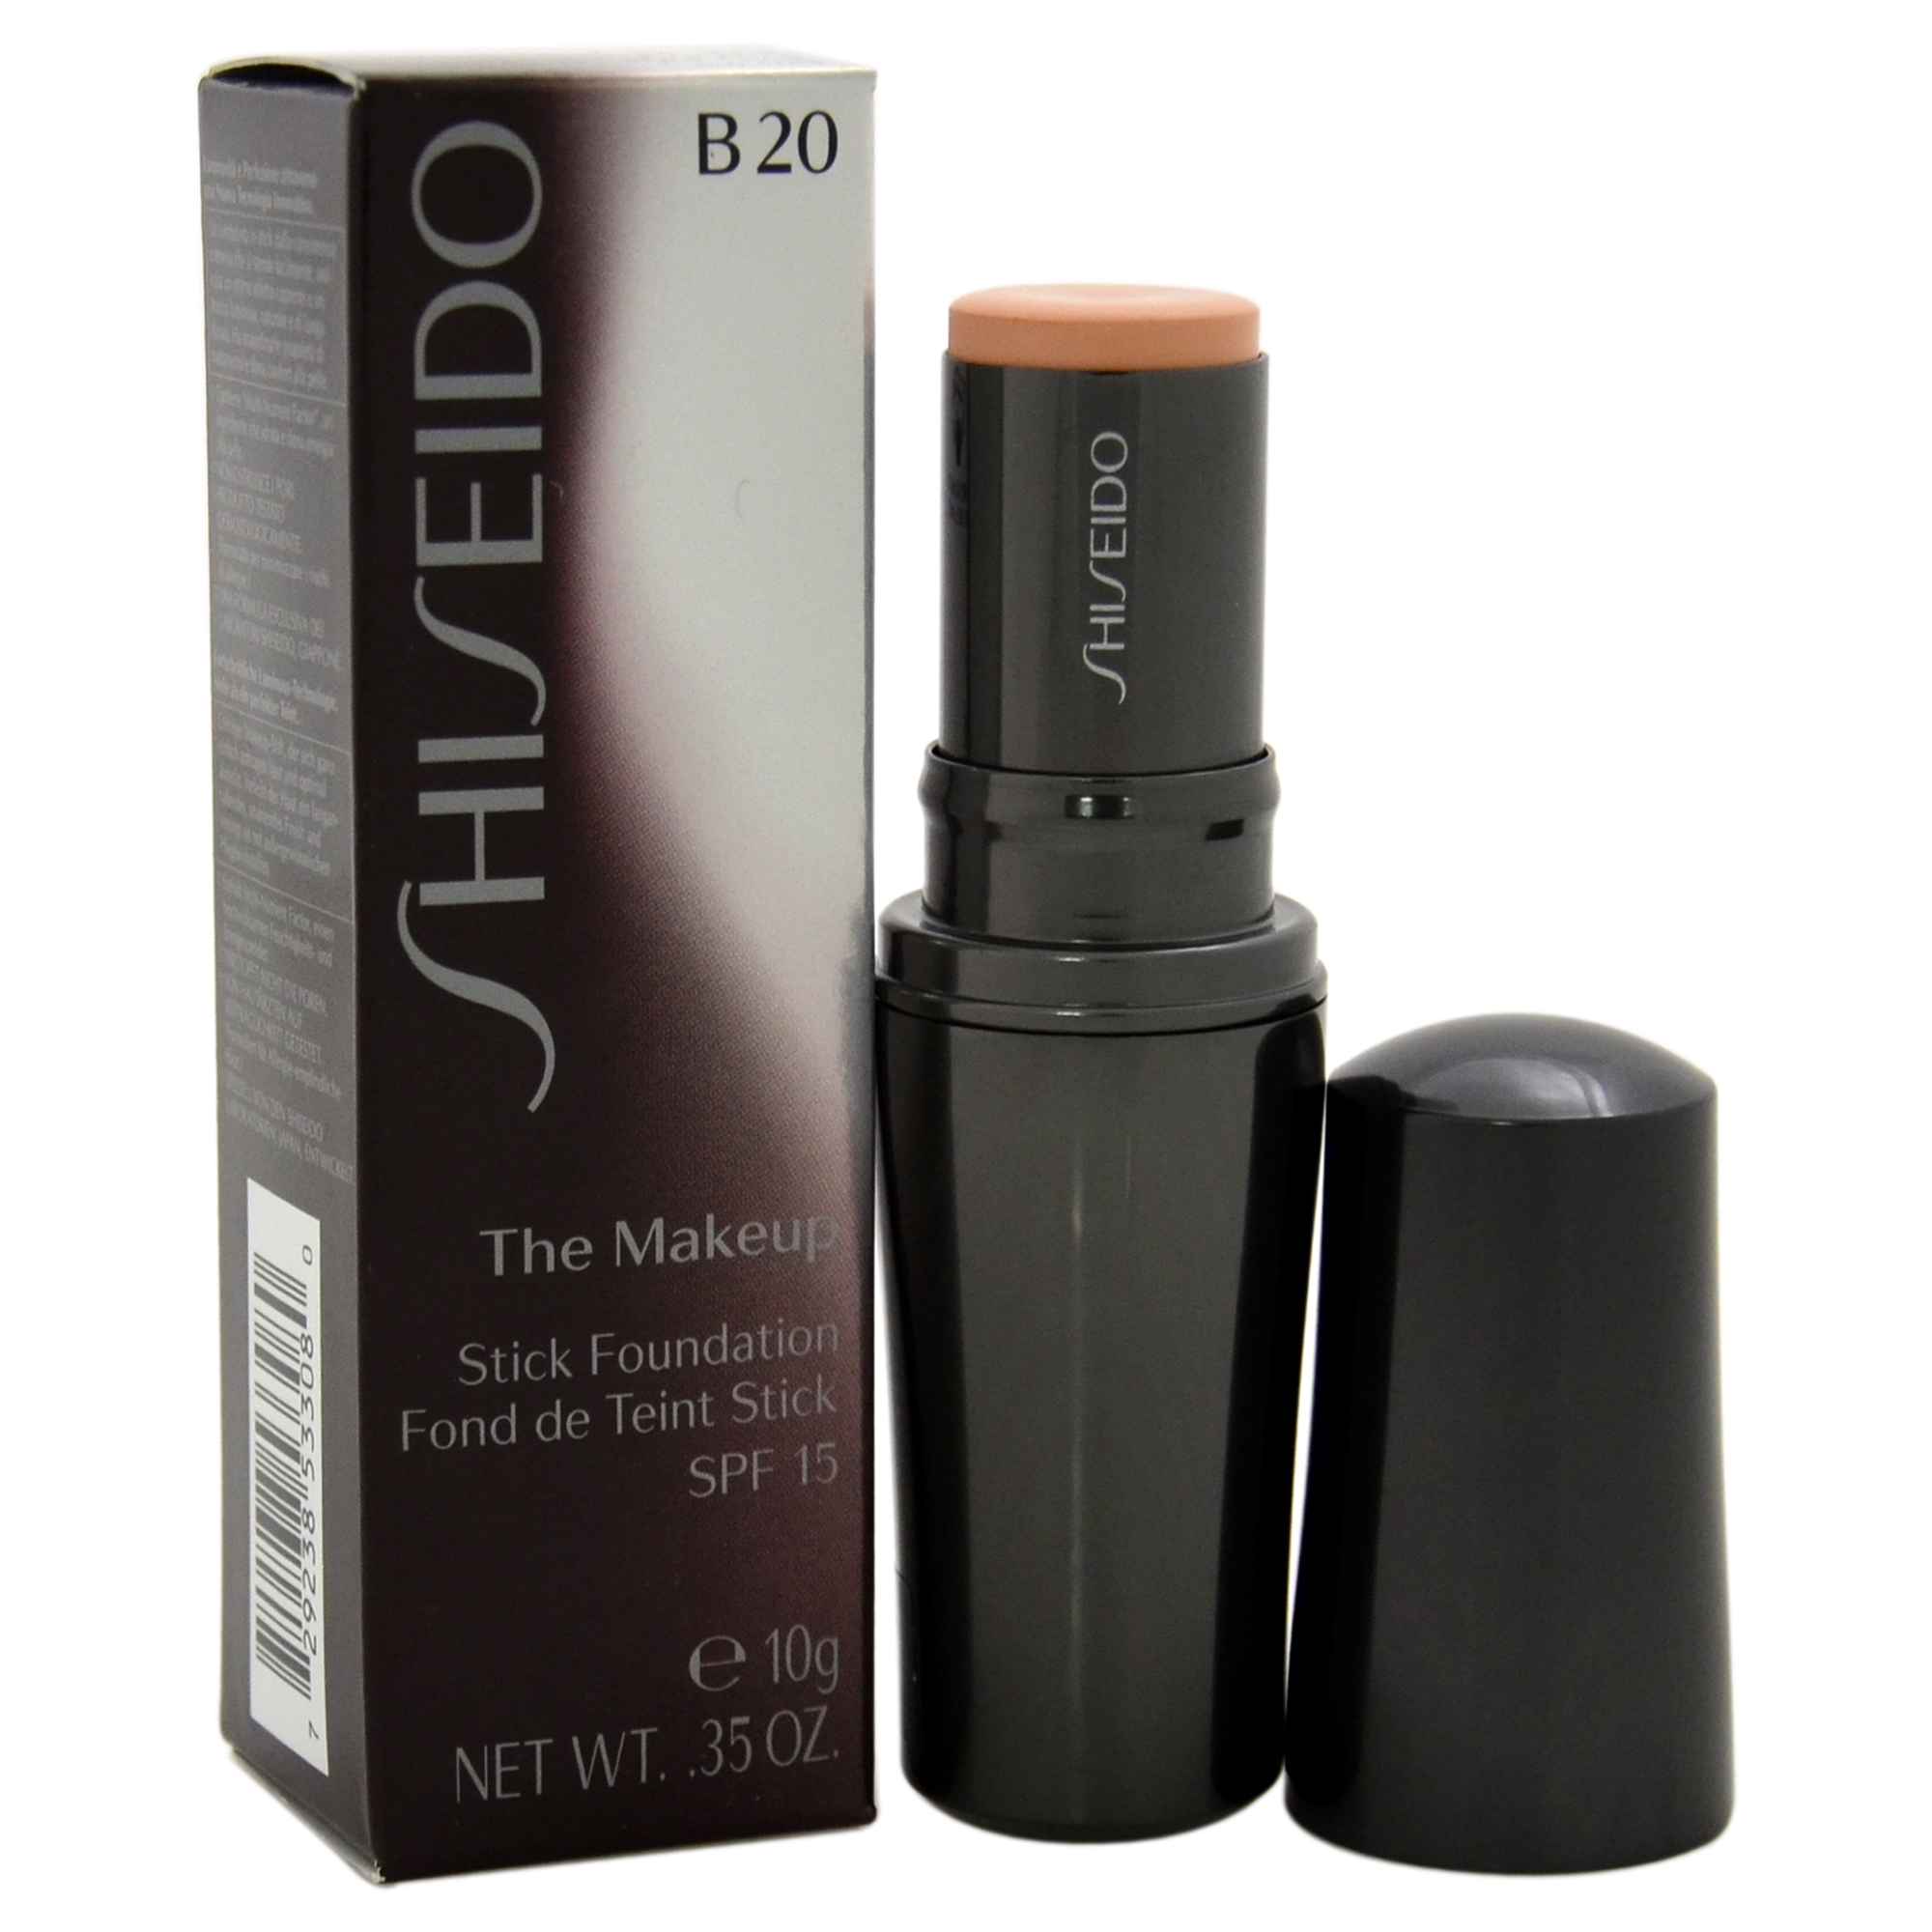 Shiseido The Makeup Stick Foundation SPF 15 -  by  for Women - 0.35 oz Foundation